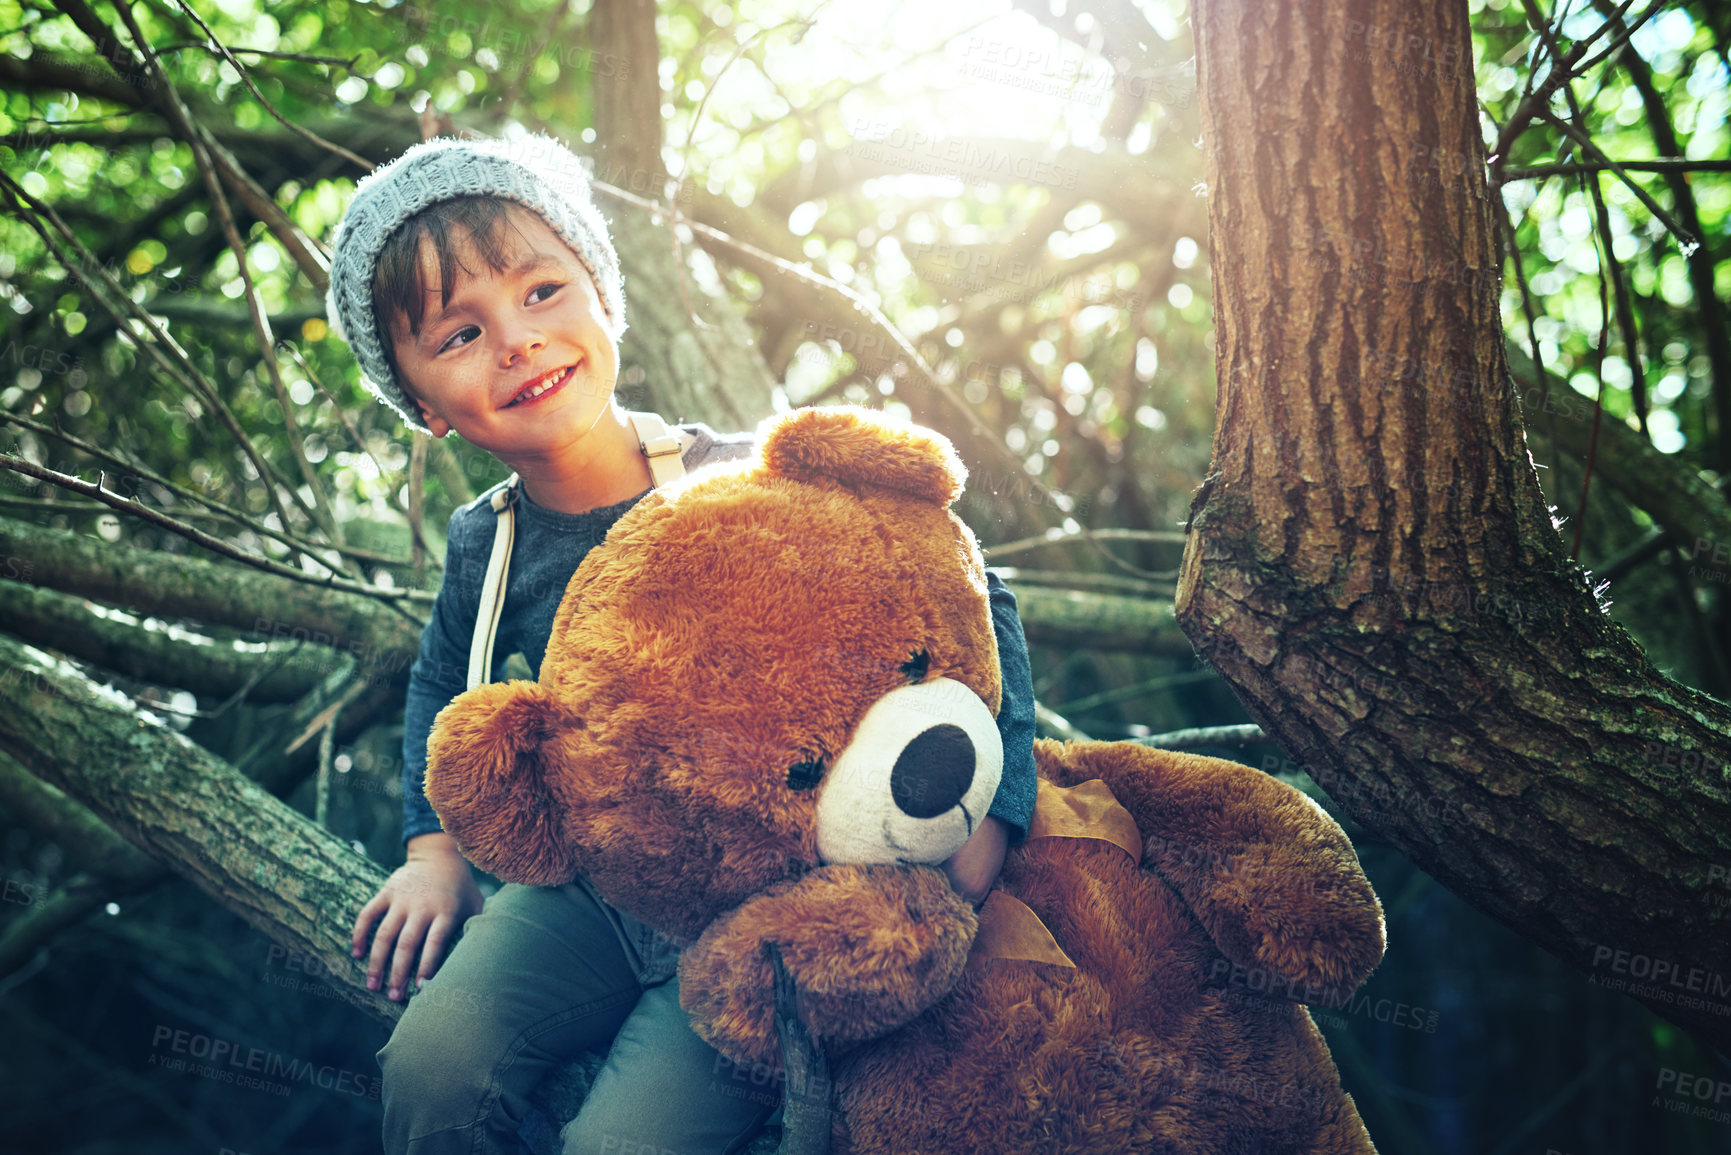 Buy stock photo Shot of a little boy playing with a teddybear outside